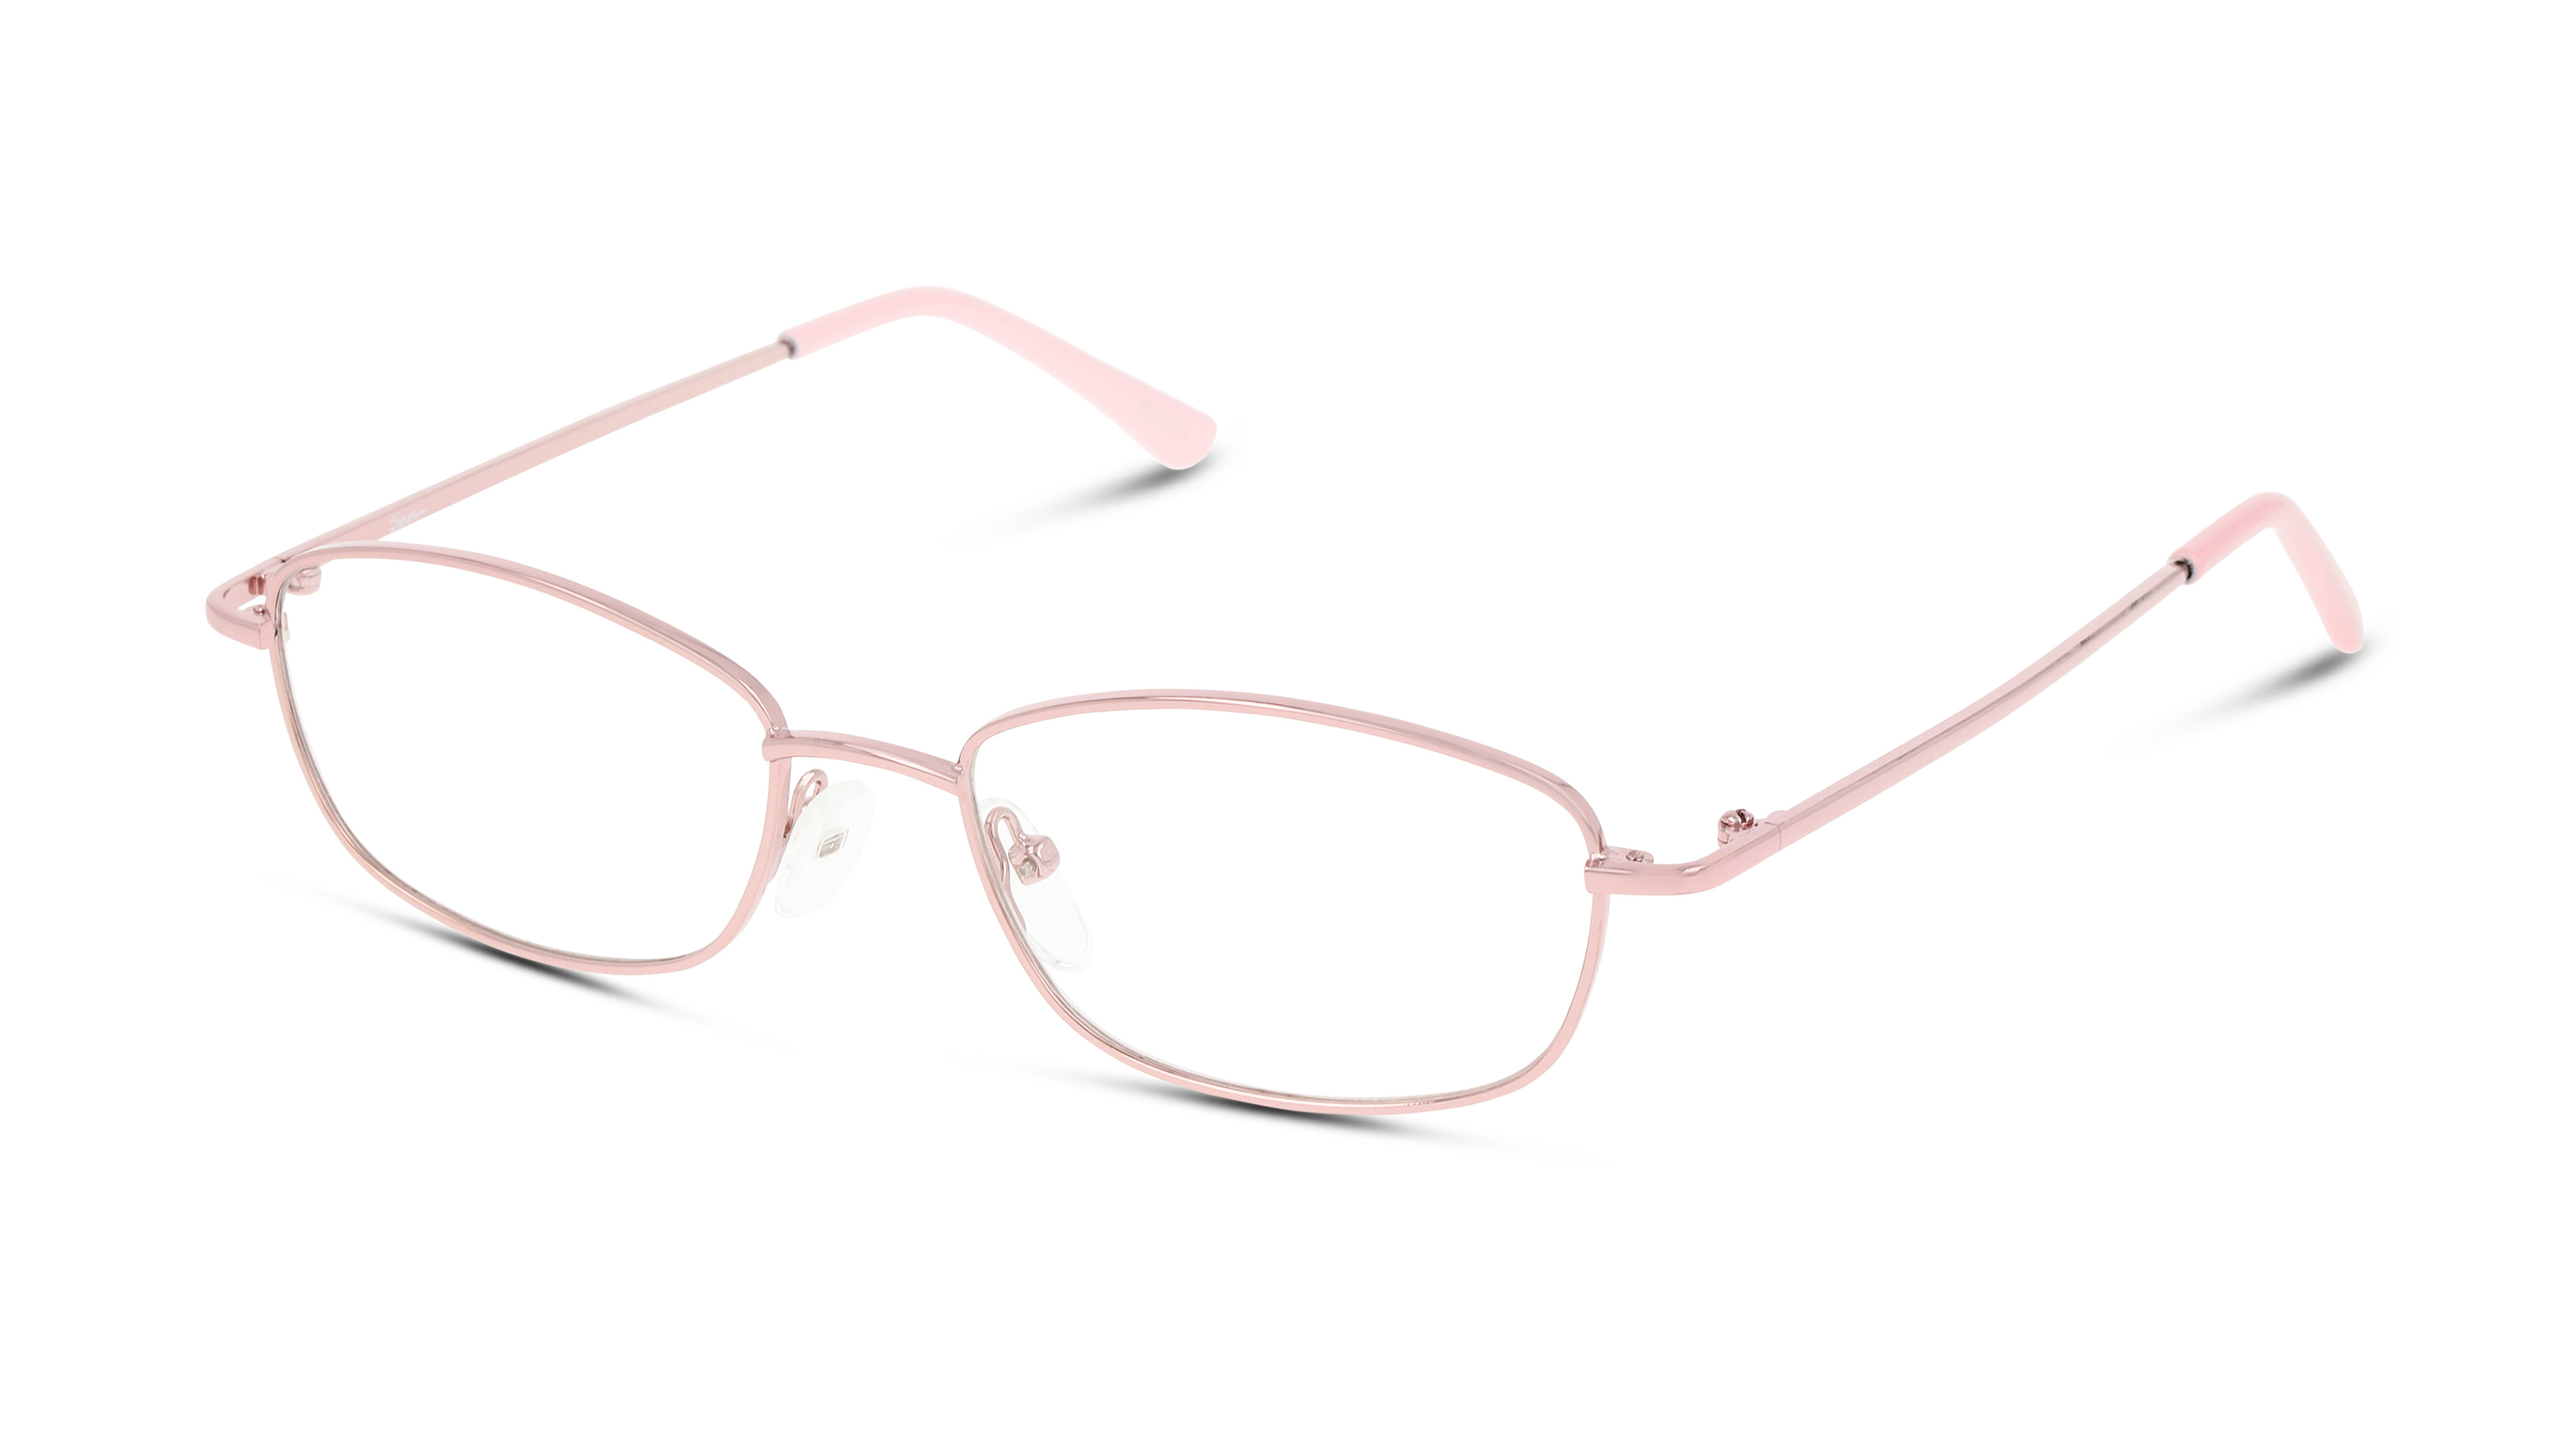 Angle_Left01 Seen SNDF03 PP00 Brille Rosa